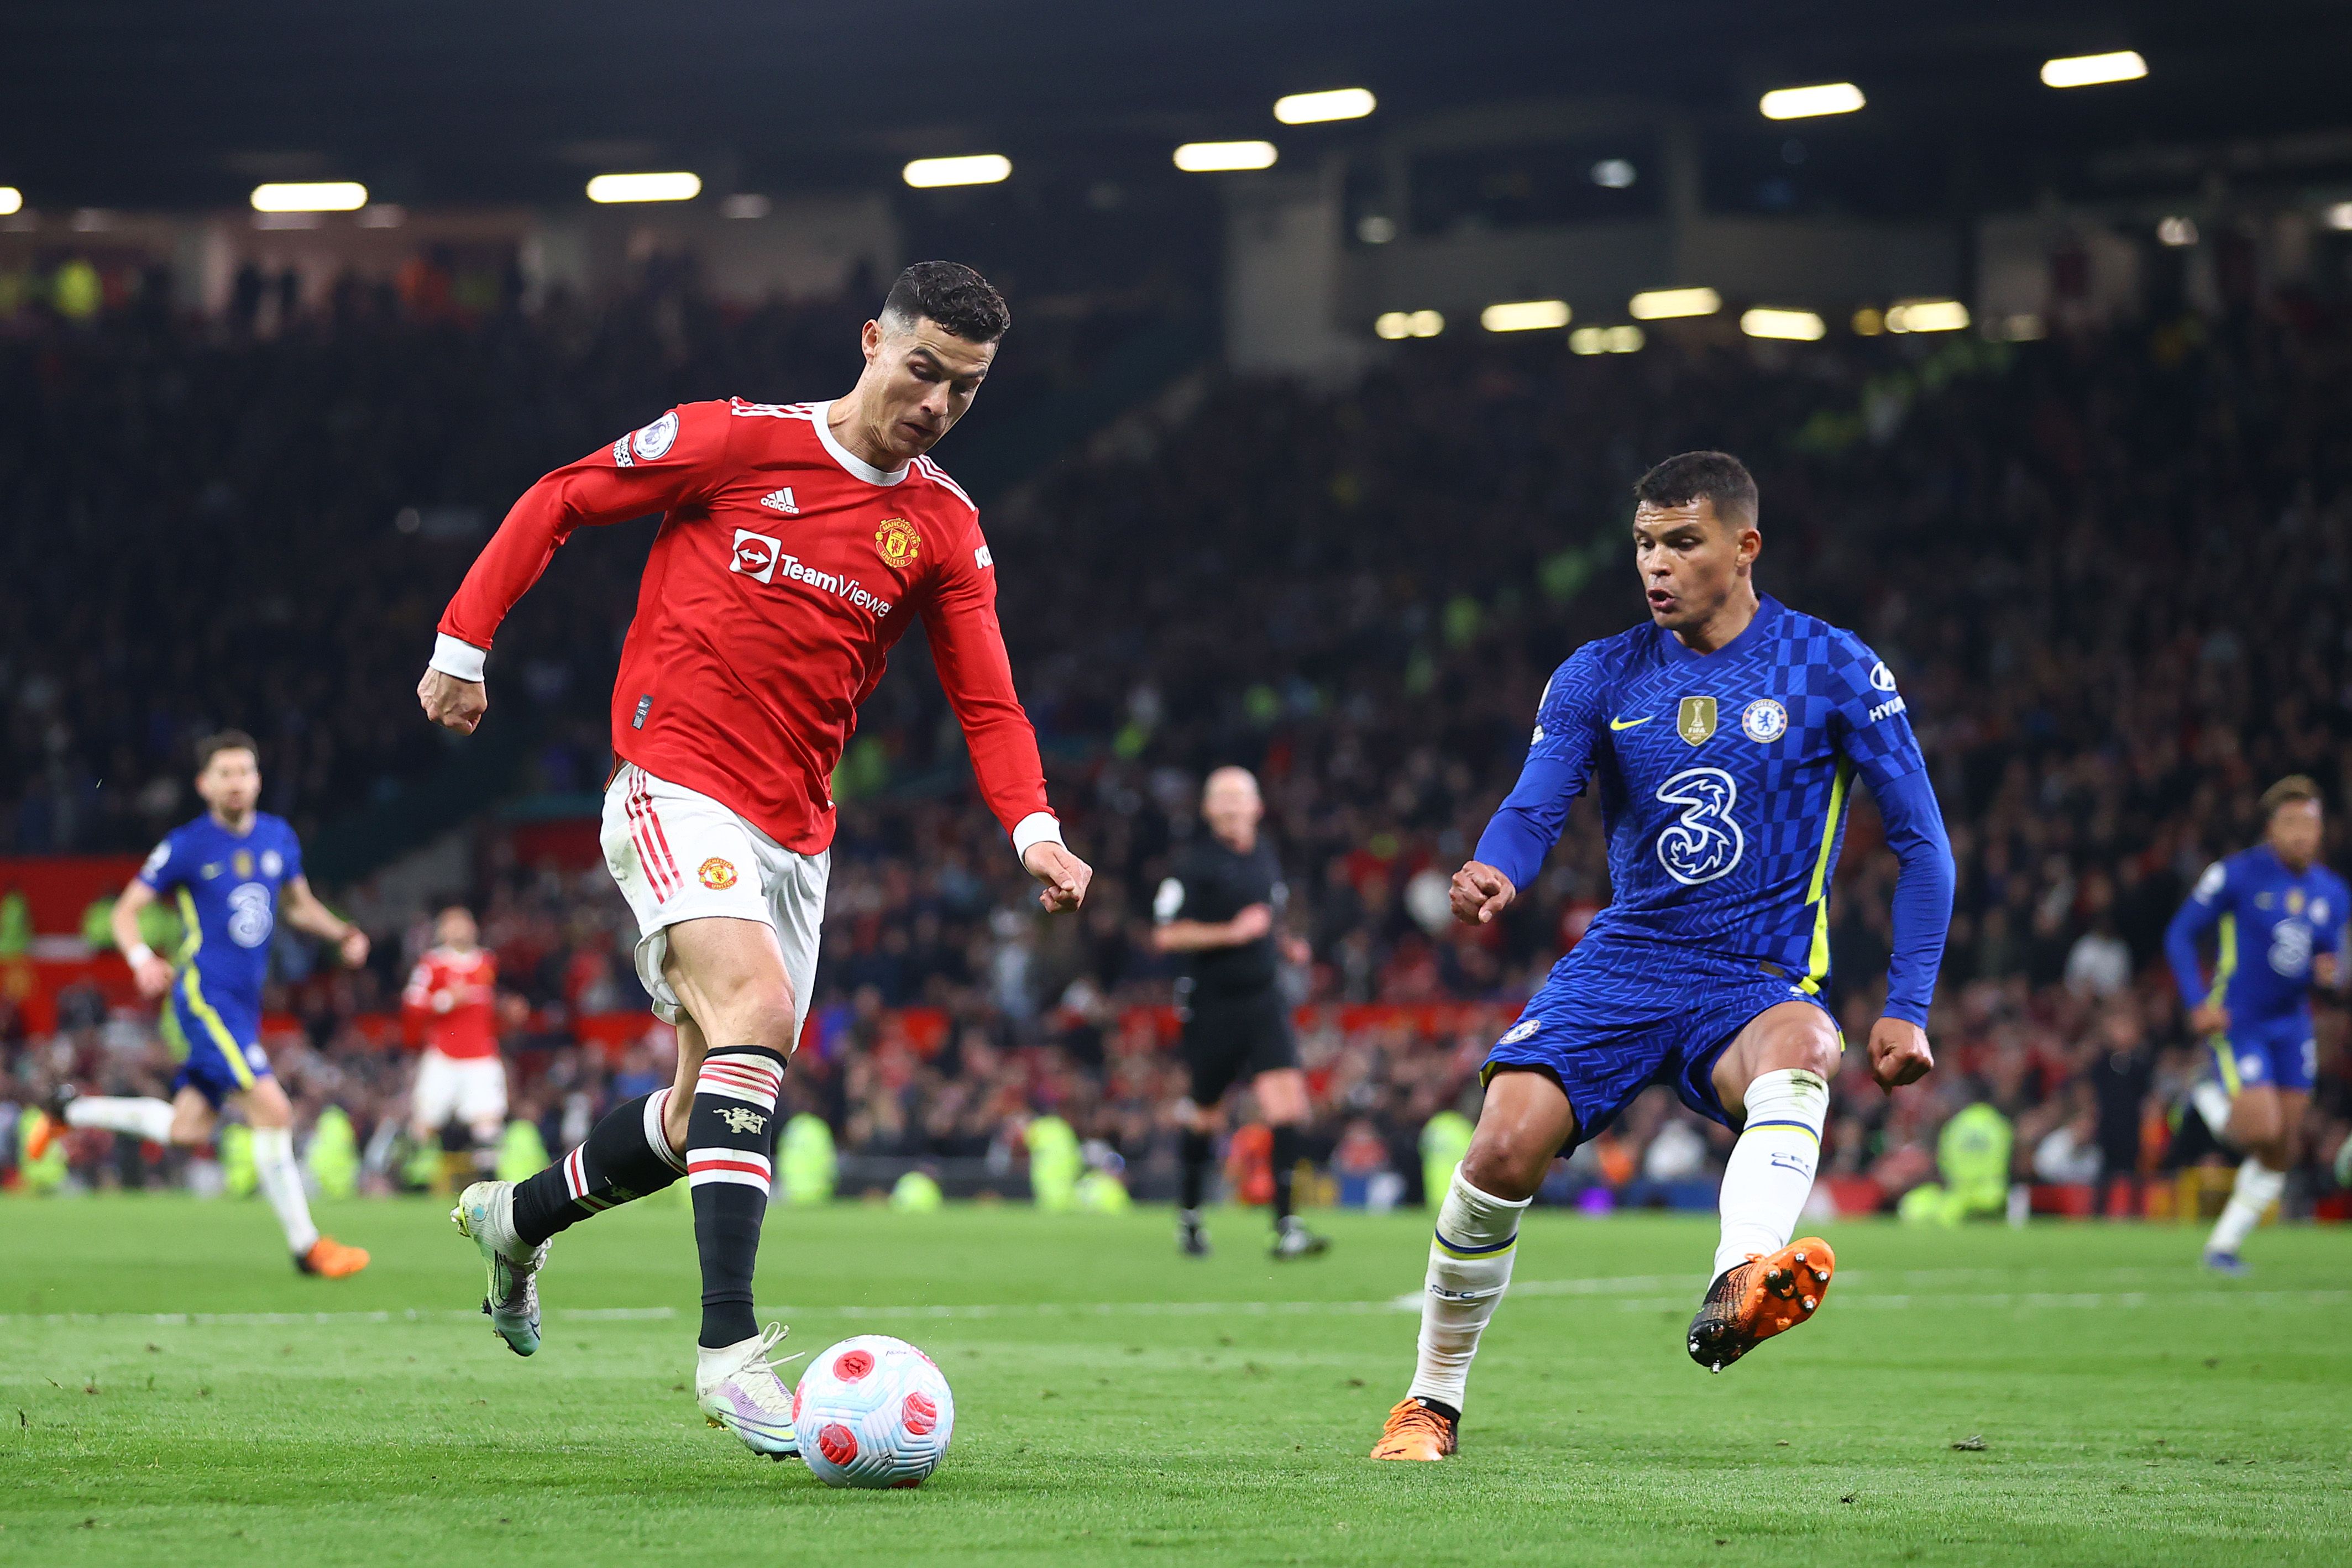 Cristiano Ronaldo of Manchester United tracked by Thiago Silva of Chelsea